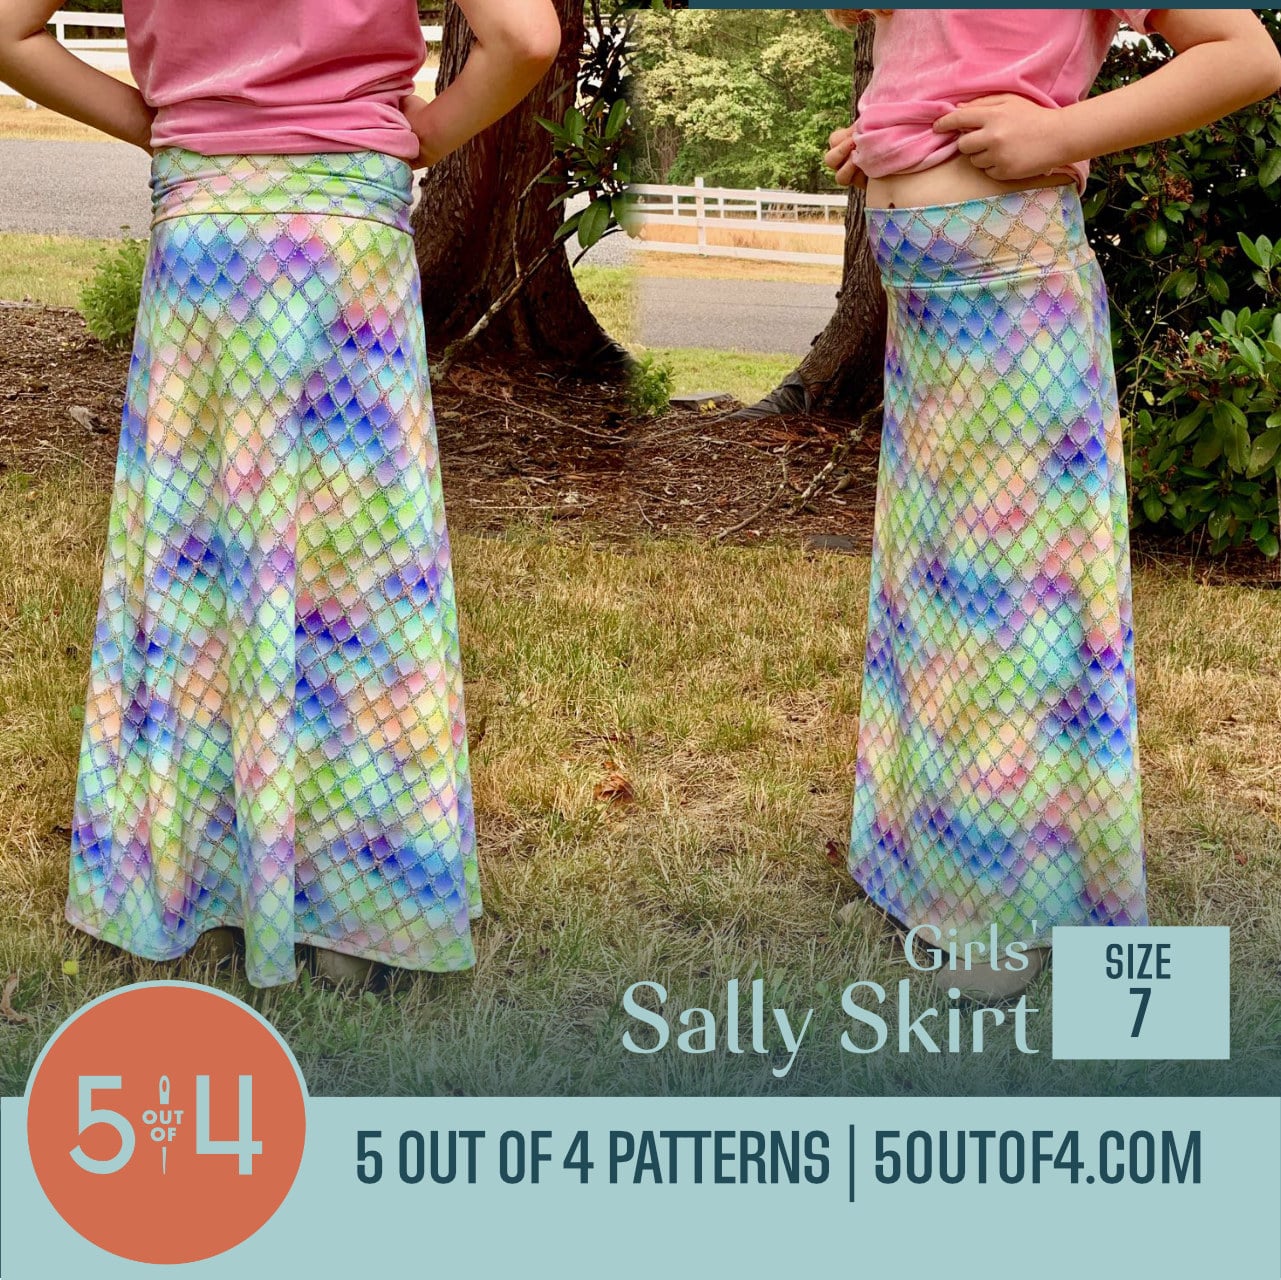 Kids' Sally Skirt - 5 out of 4 Patterns